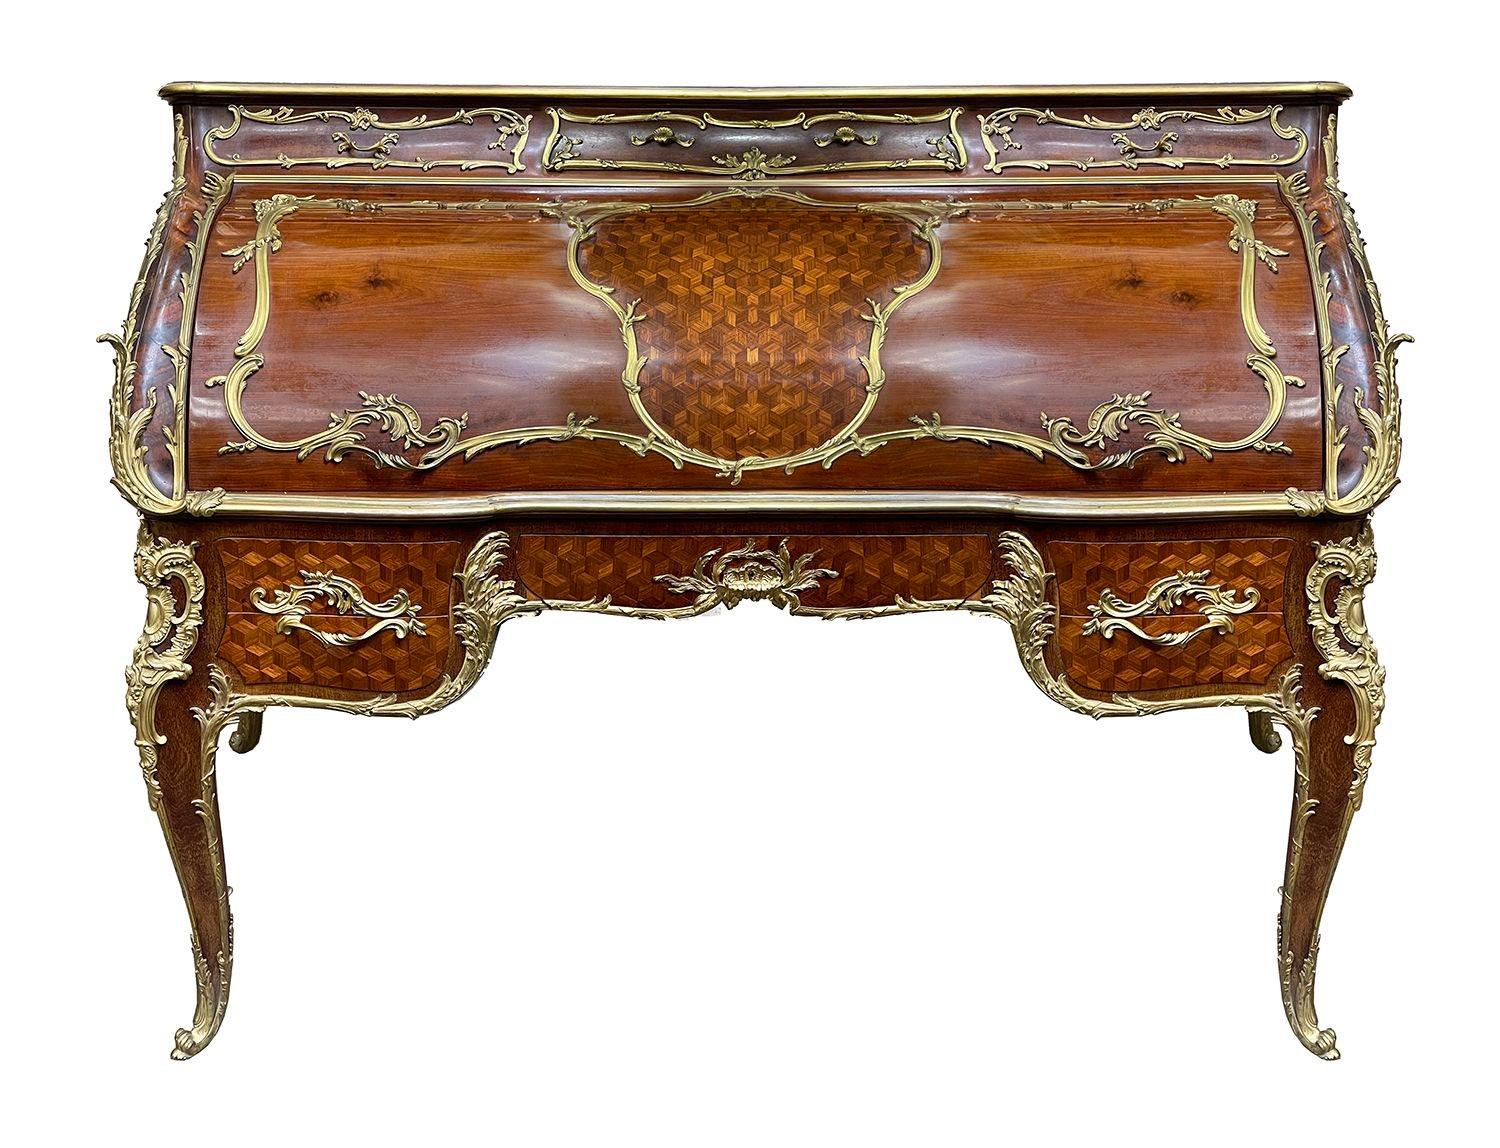 A magnificent, fine quality late 19th Century French Mahogany cylinder bureau, by Francoise Linke. Having a three quarter pierced rococo ormolu gallery to the top, three drawers beneath each with scrolling foliate ormolu mounts and handles. The